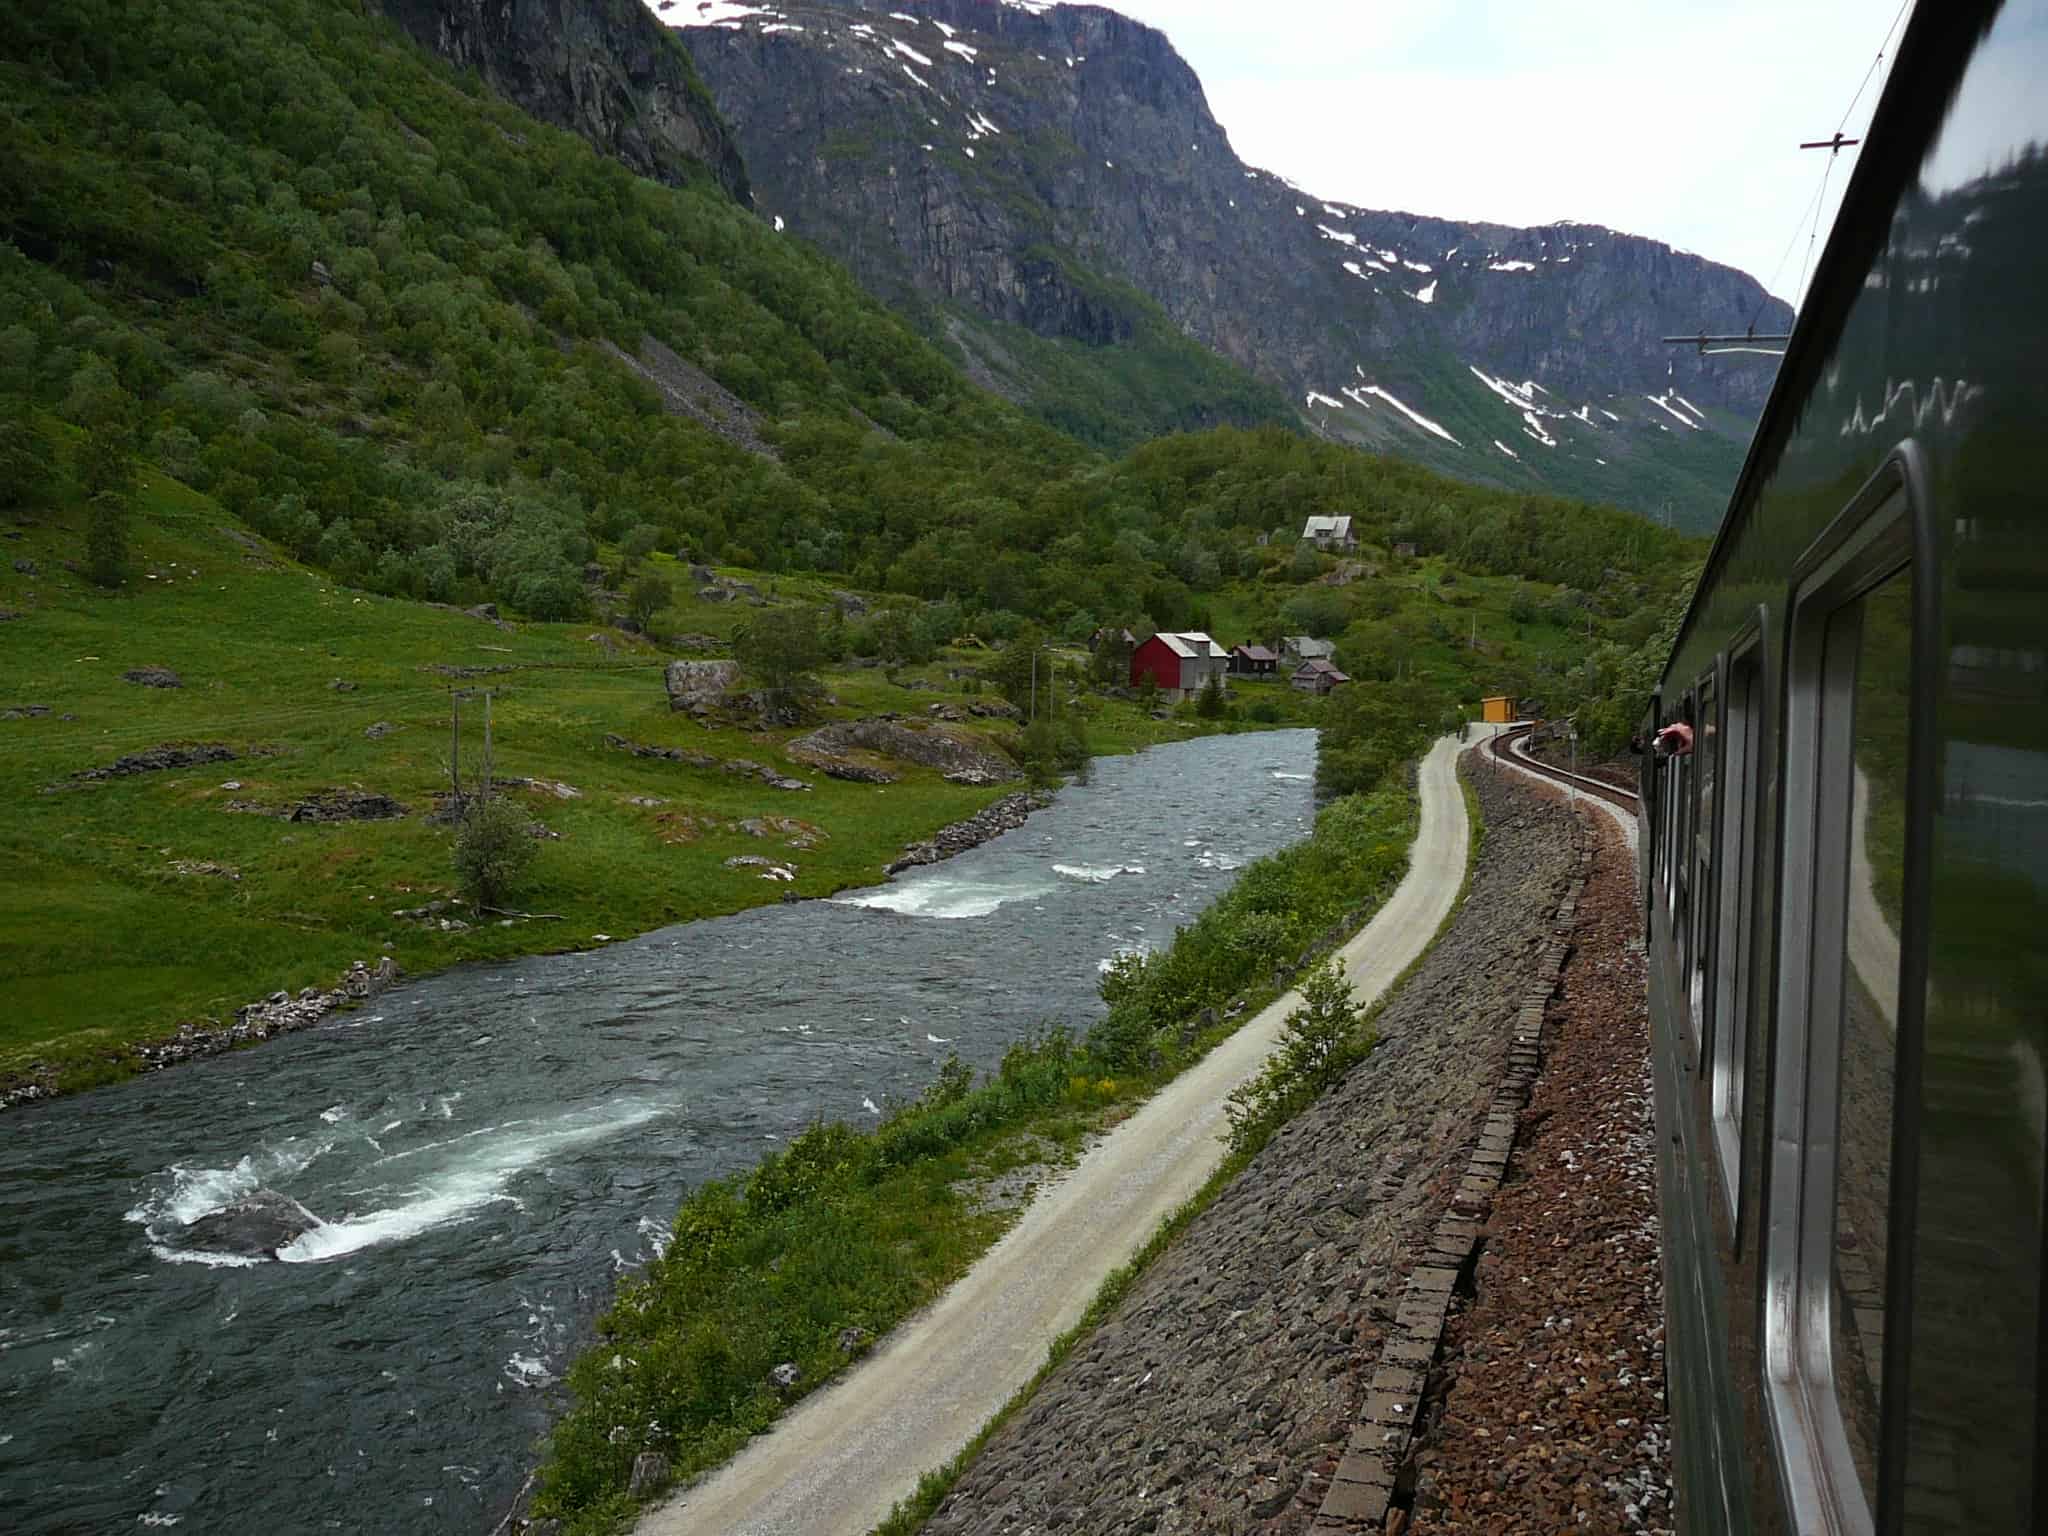 The Flamsbana runs from Myrdal to Flåm, a town in the valley of the UNESCO fjords. It is a train ride through the mighty fjord landscape.